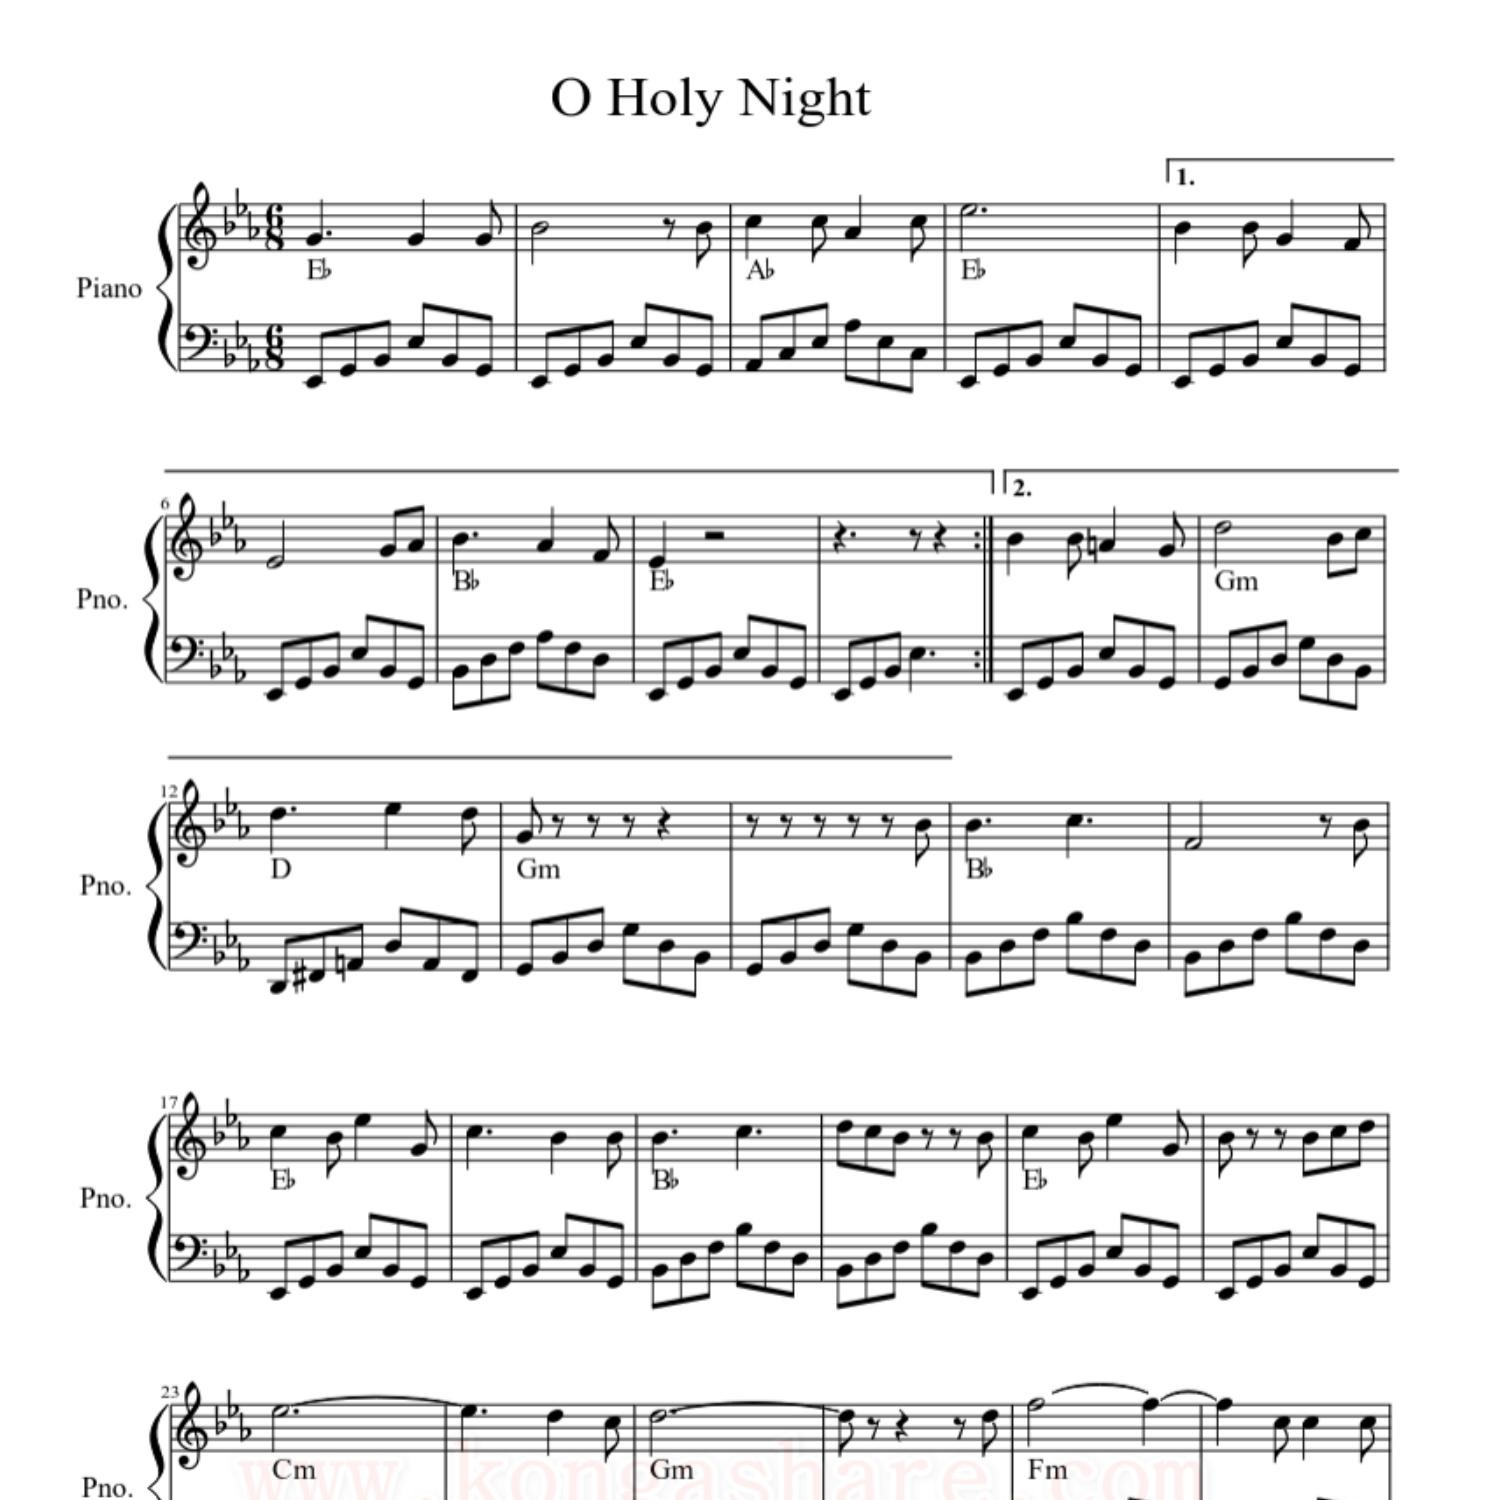 O Holy Night music sheet for Piano - Cantique de Noël in PDF.pdf | DocDroid